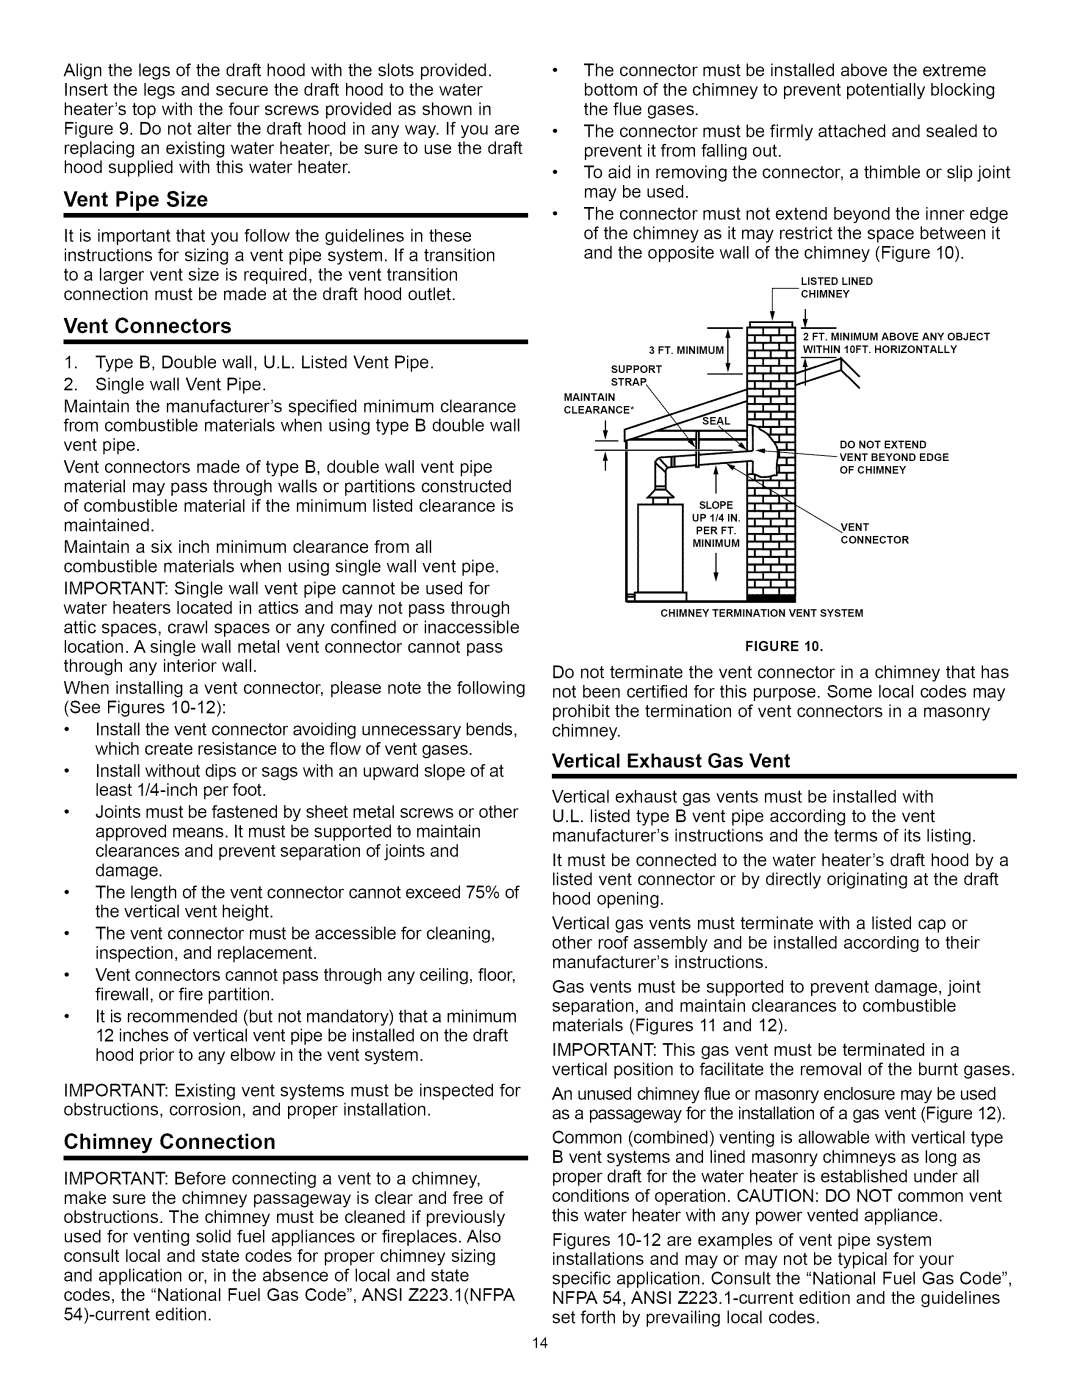 A.O. Smith Water Heater installation instructions Vent Pipe Size, Vent Connectors, Chimney Connection 